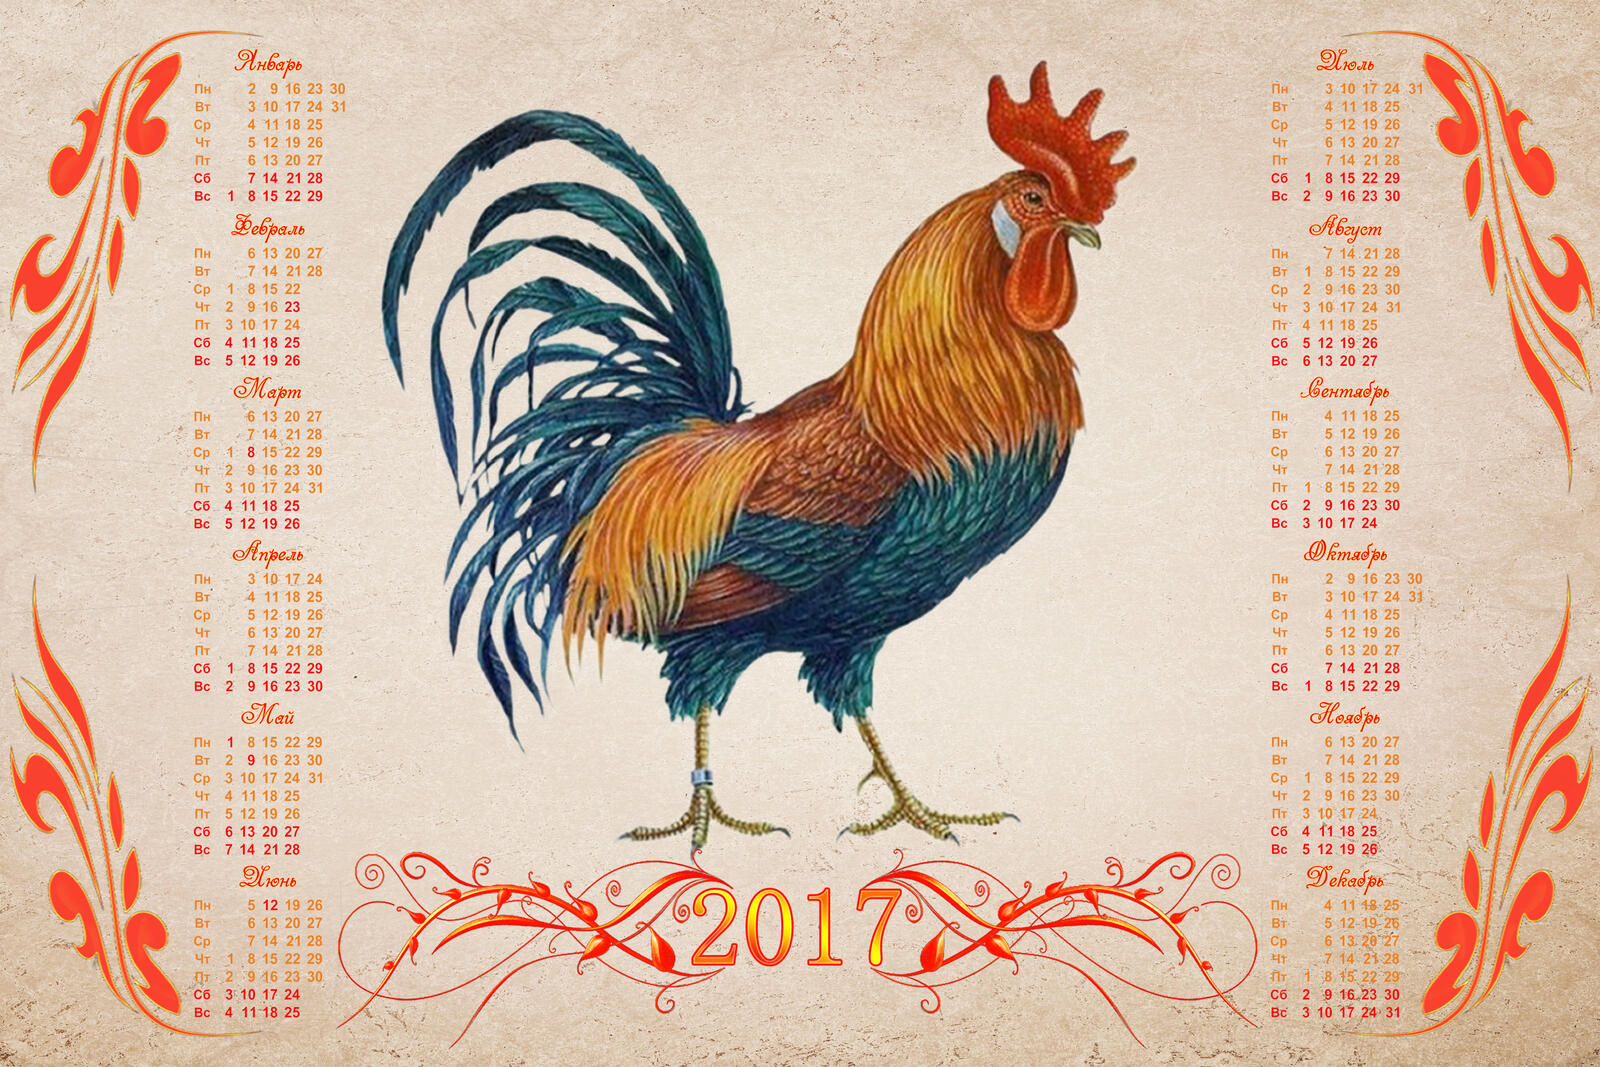 Wallpapers Calendar for 2017 Year of the Red Fire Cock Fire Cock Calendar for 2017 on the desktop